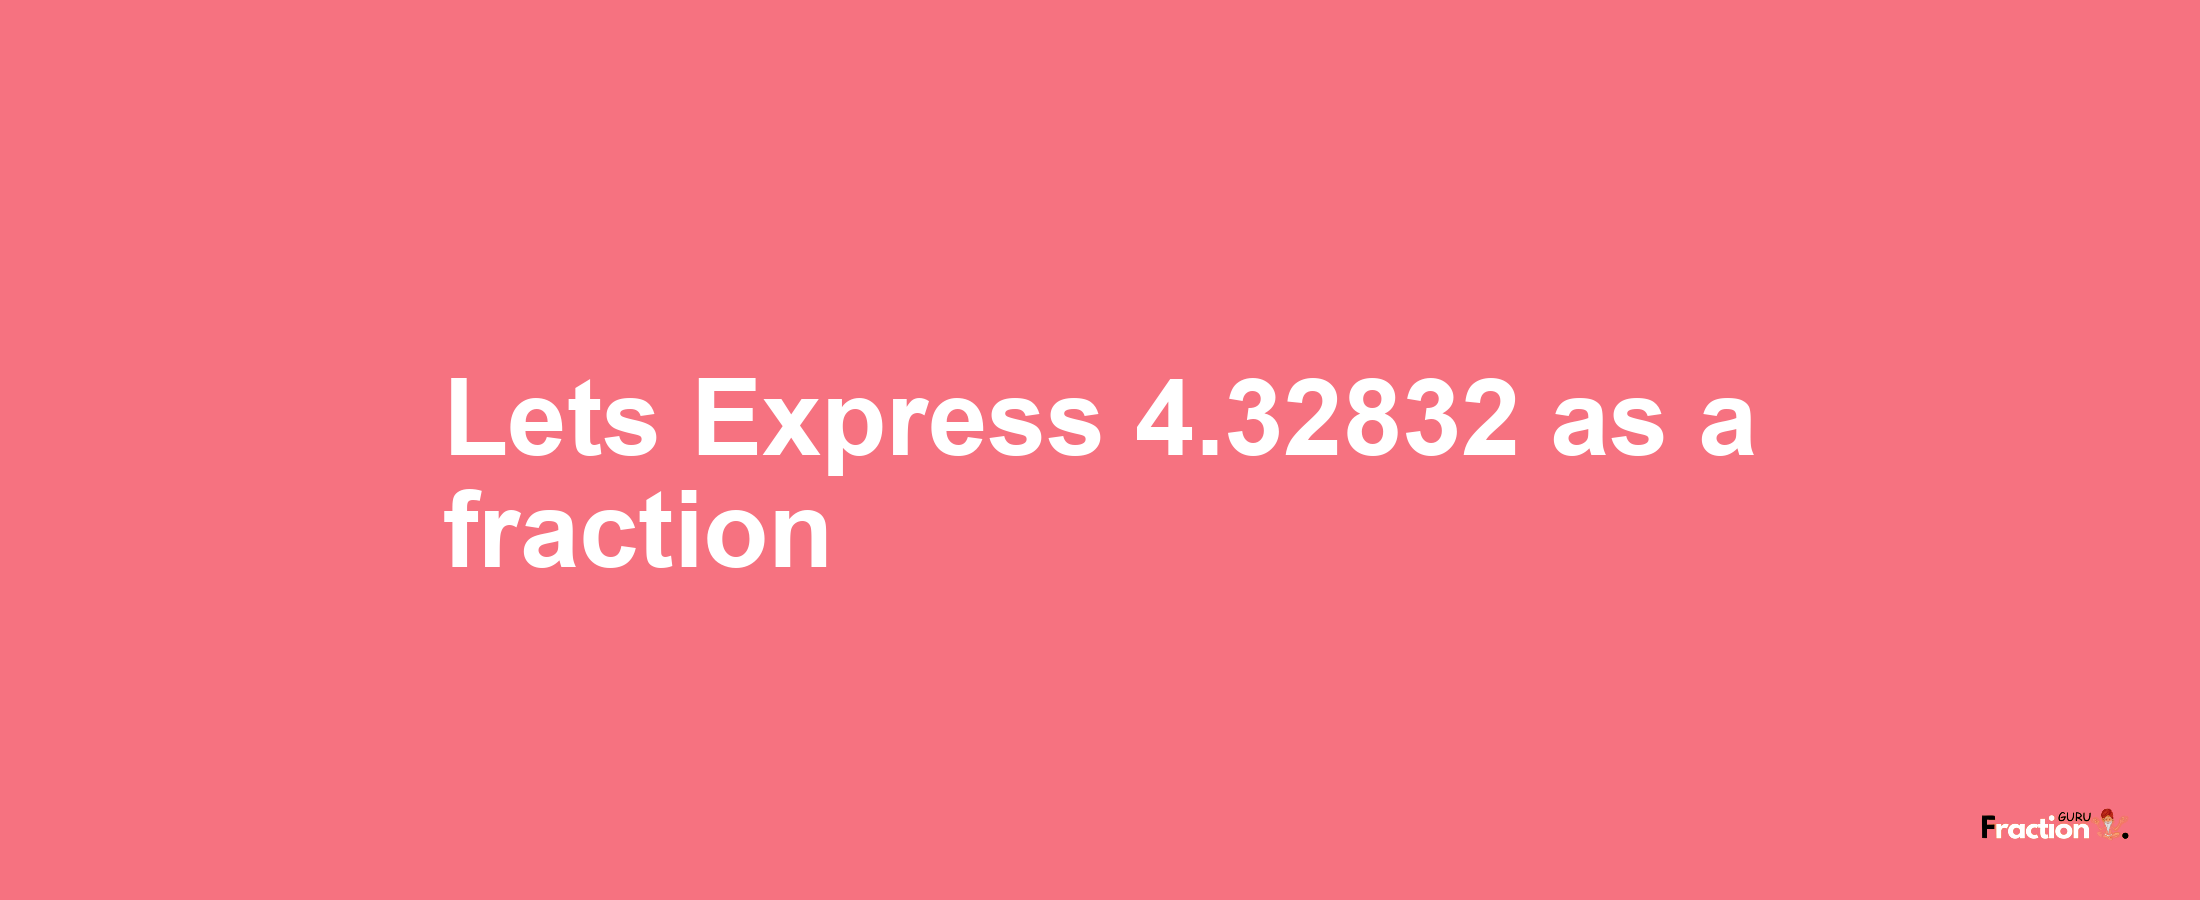 Lets Express 4.32832 as afraction